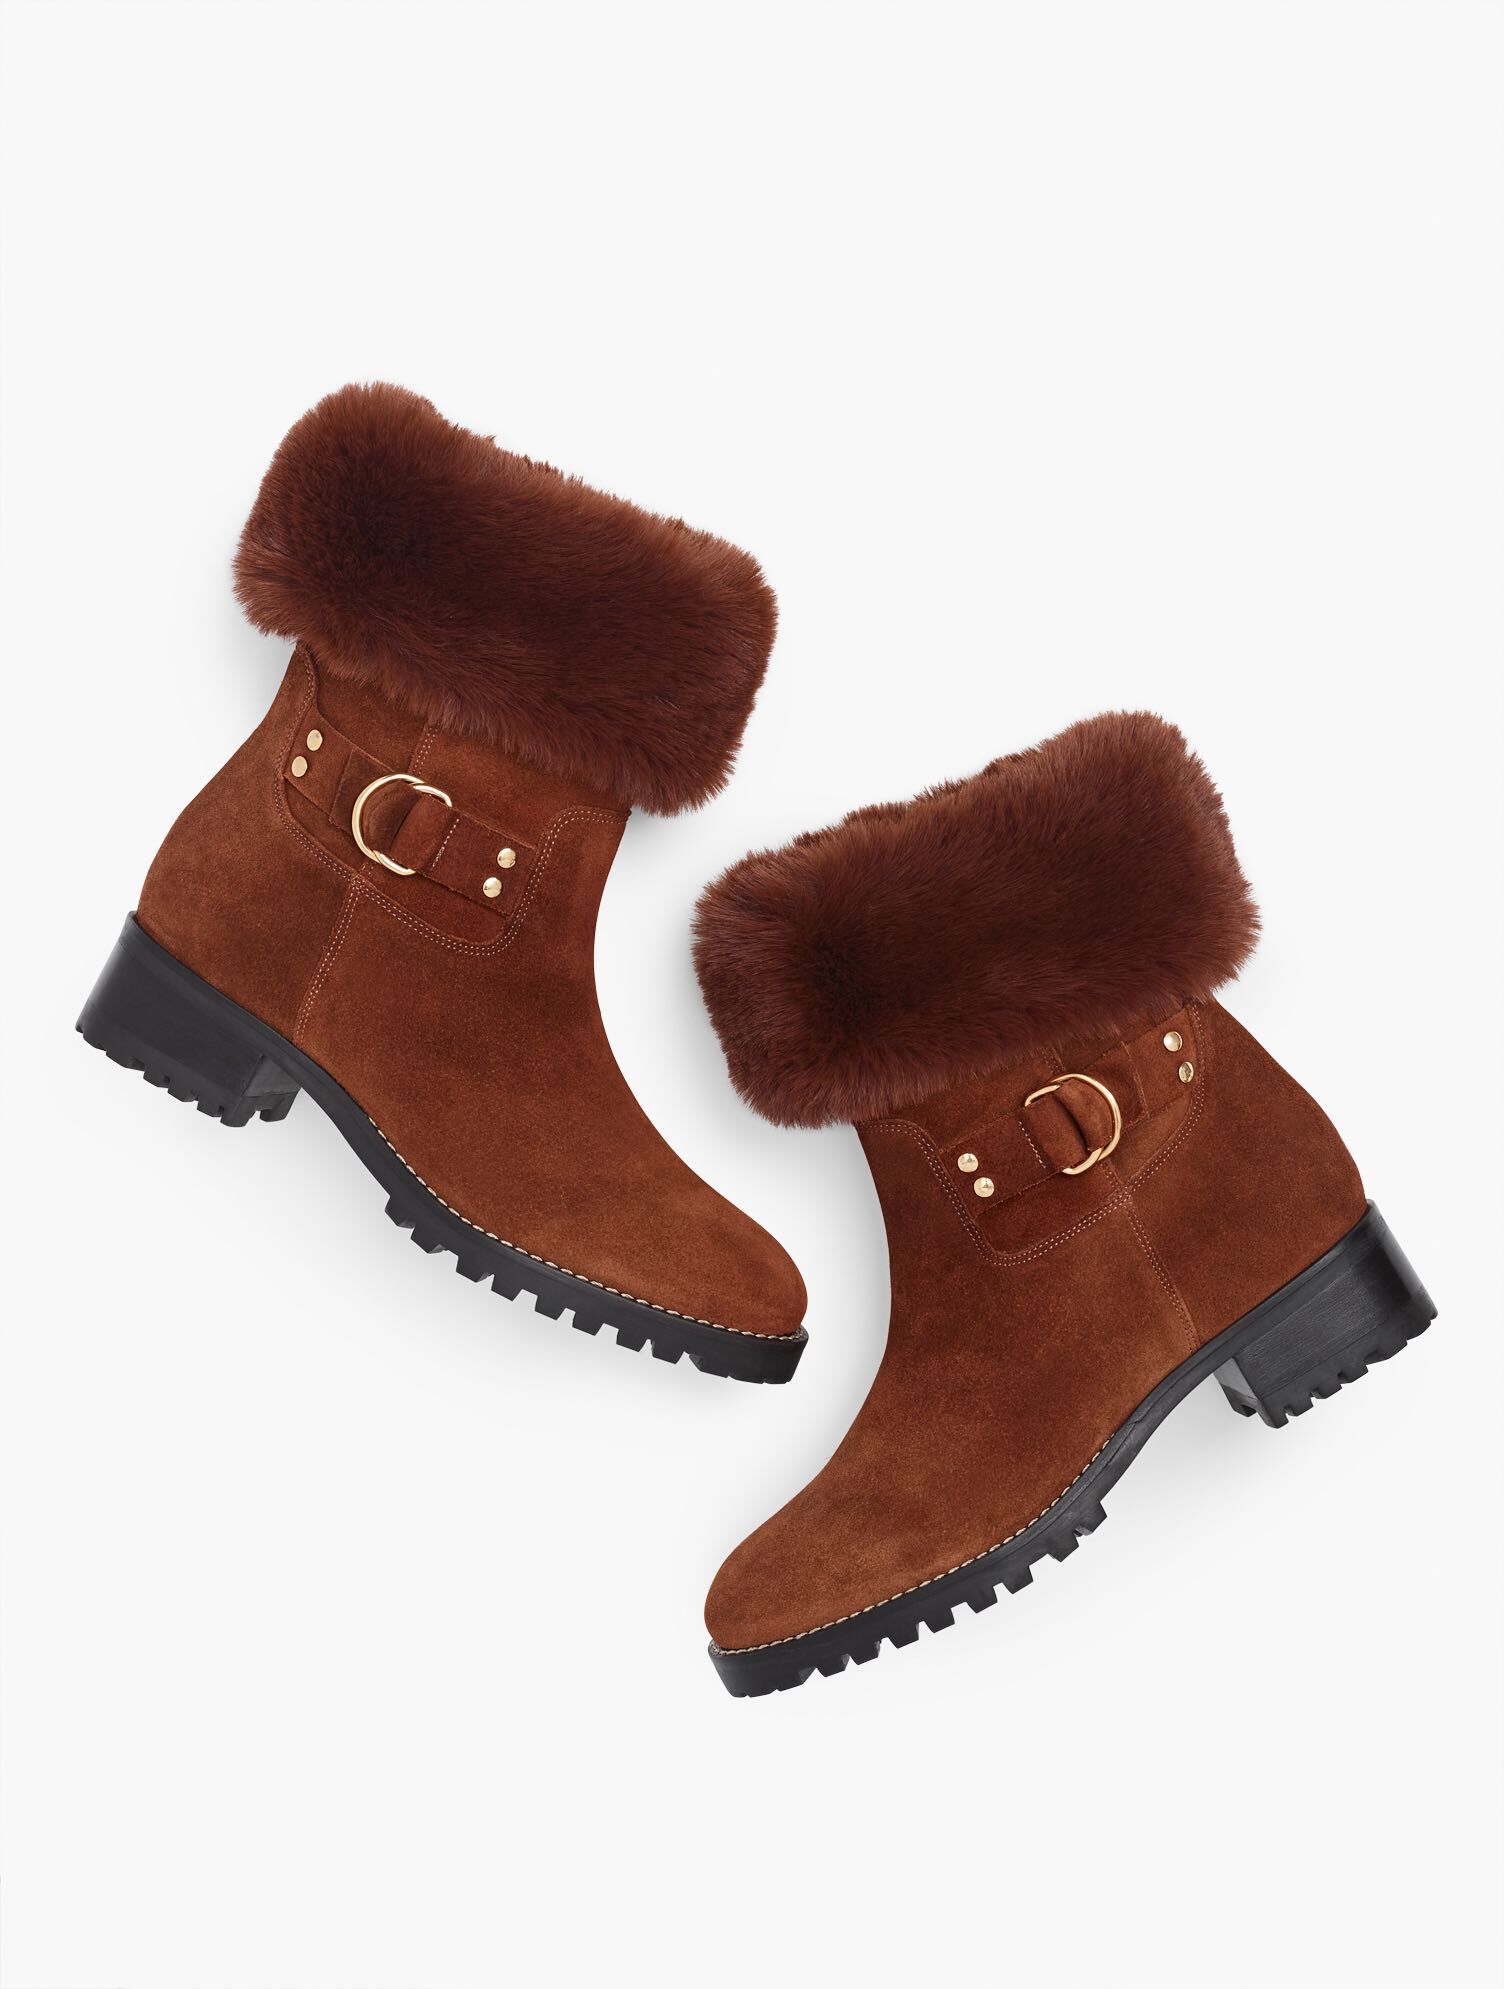 Tish Foldover Cuff Ankle Boots | Talbots